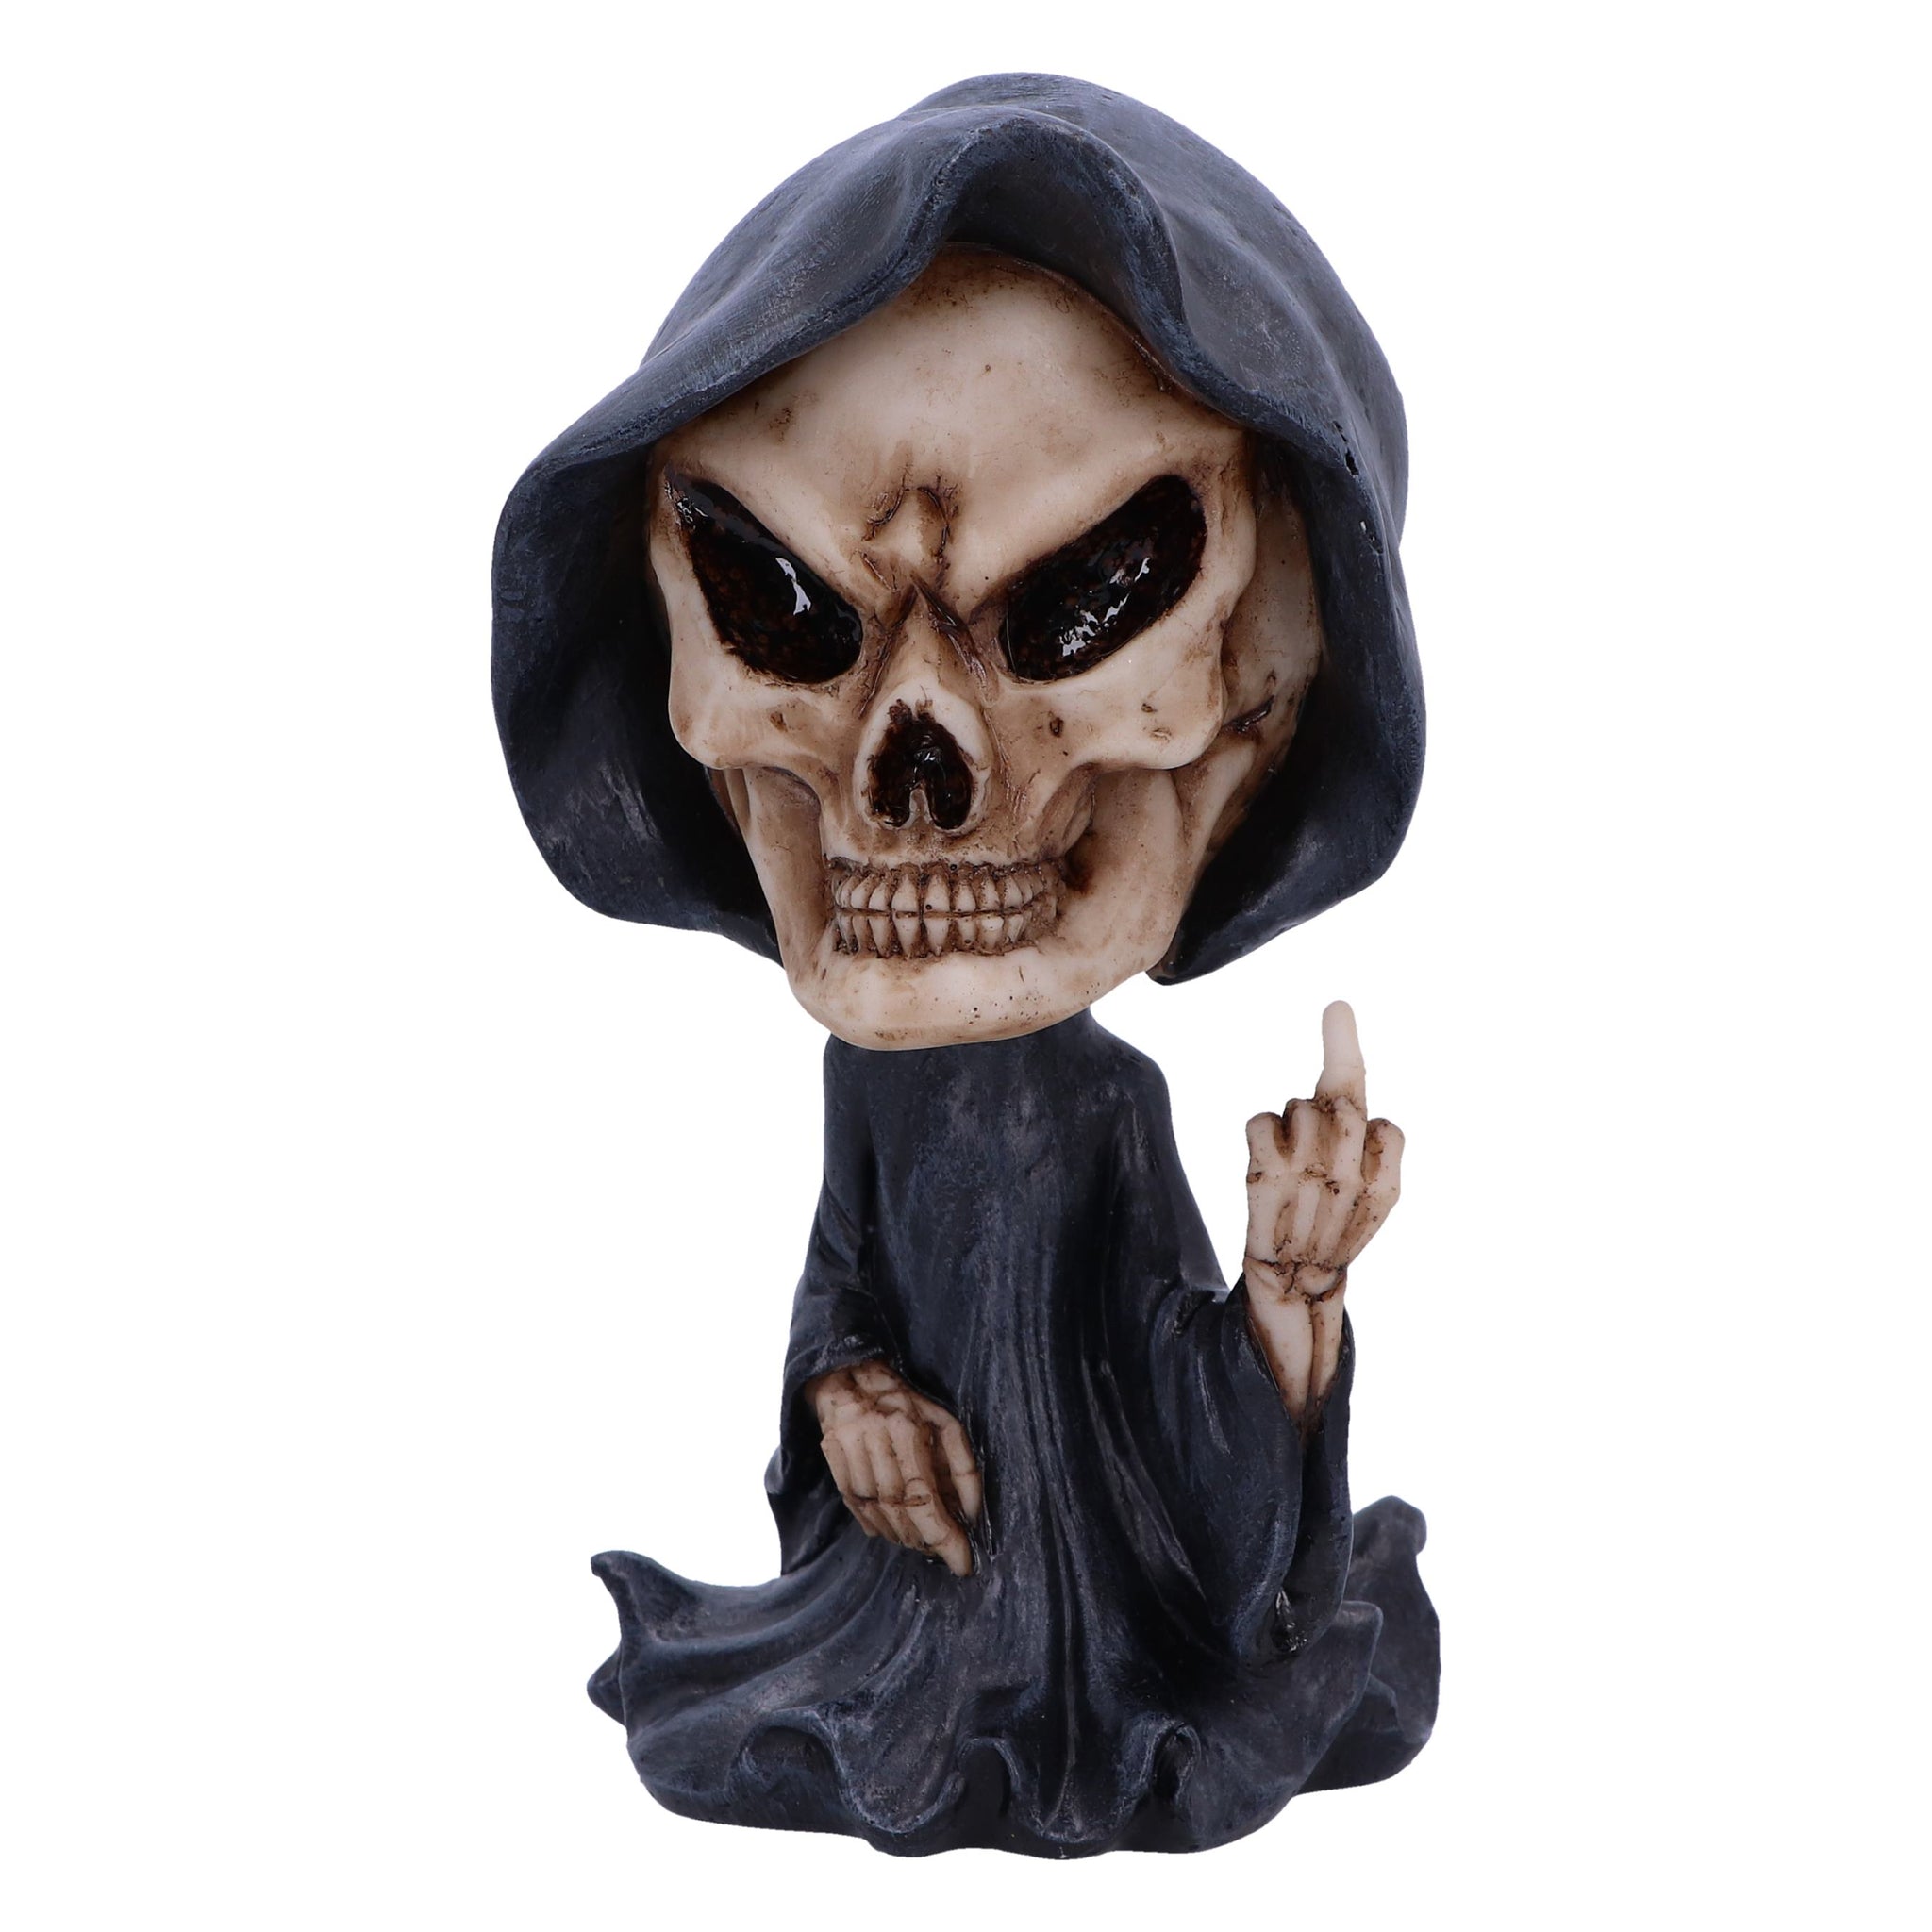 Reapers Wish 15cm Ornament